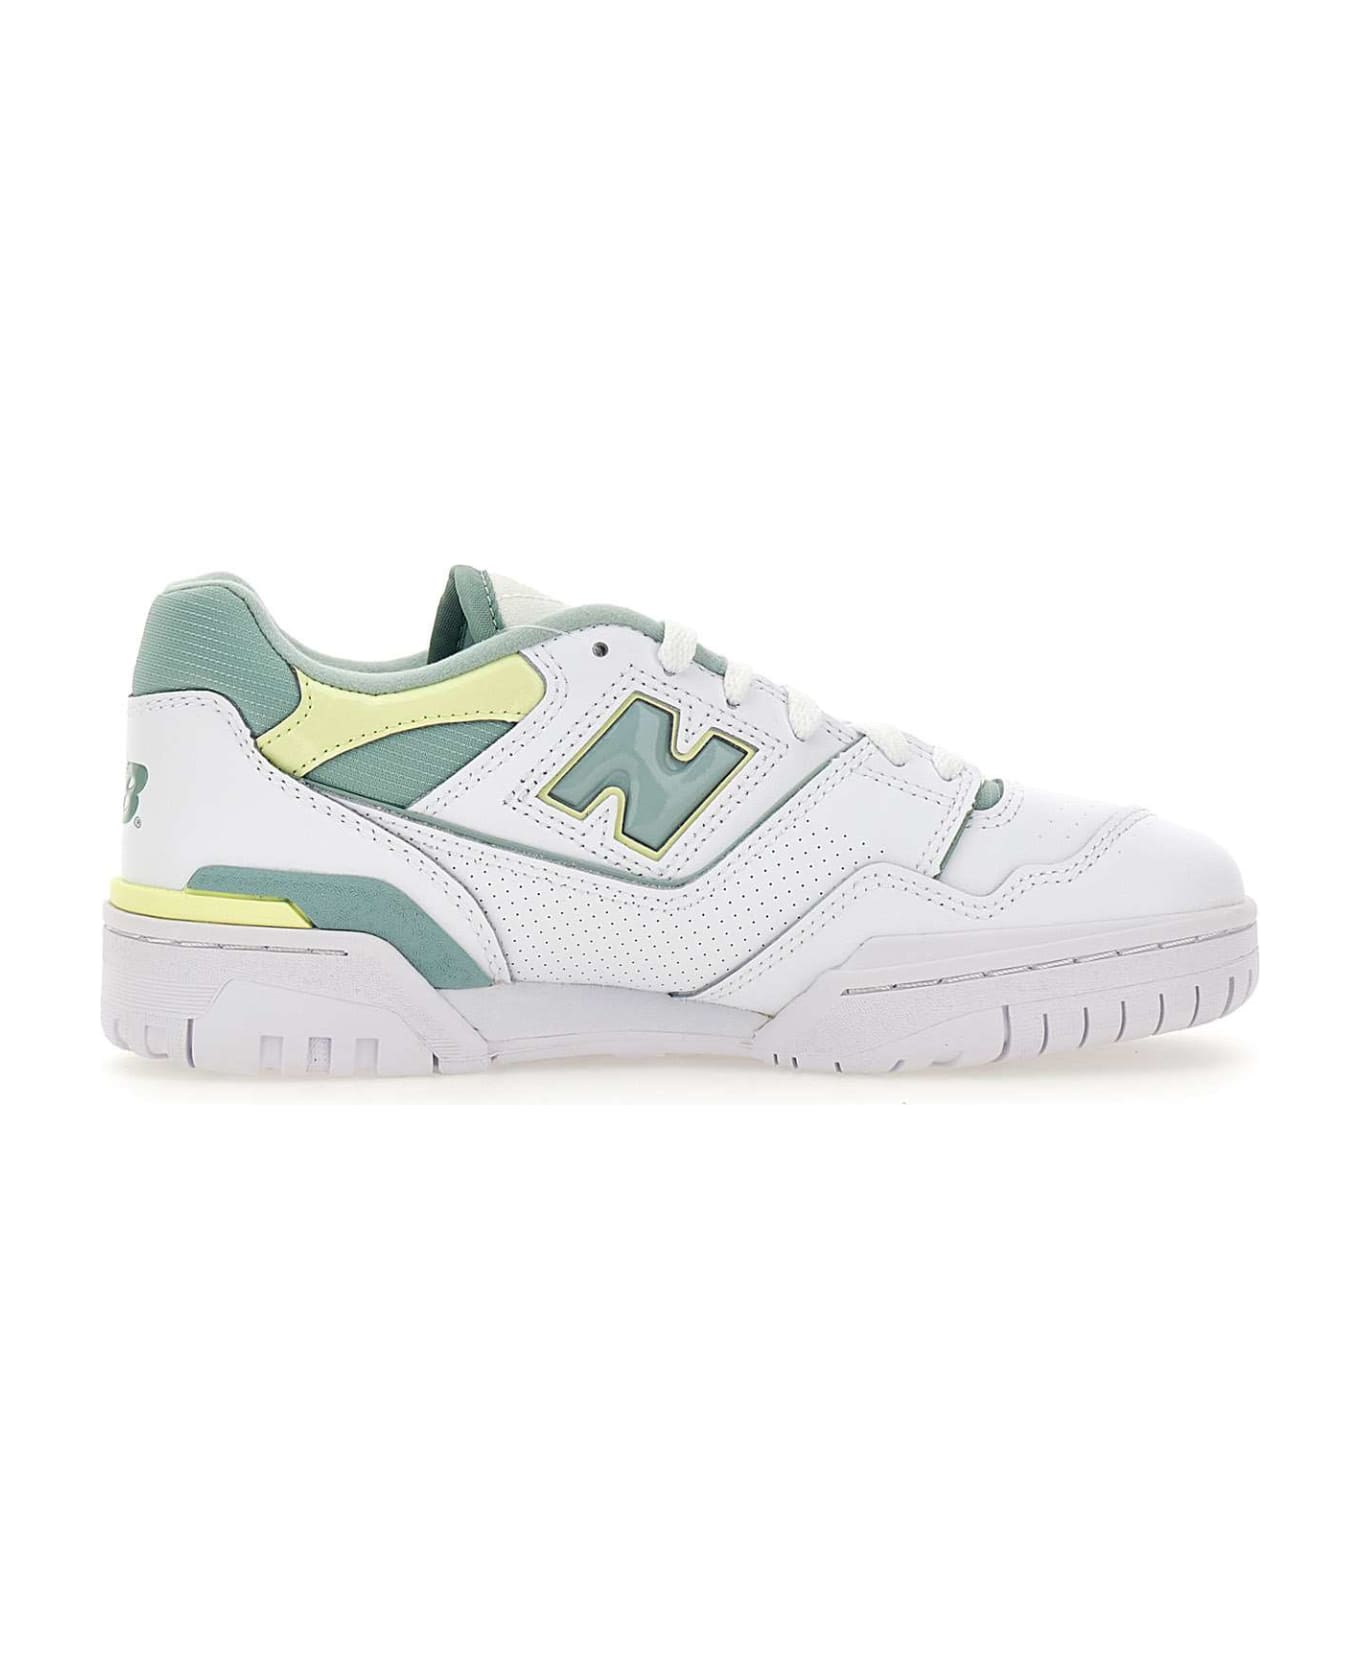 New Balance "bb550" Leather Sneakers - White-grey スニーカー